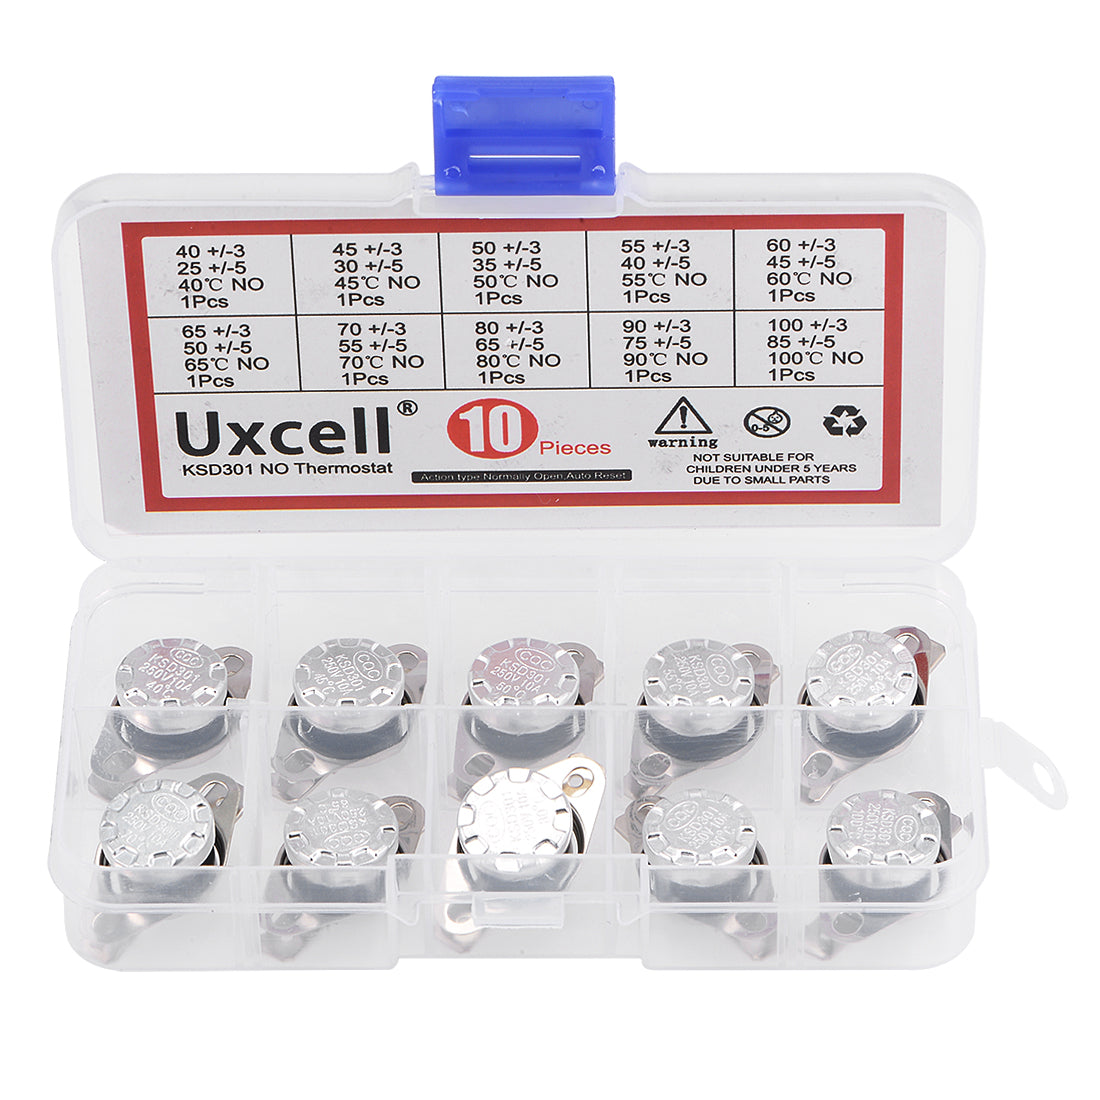 uxcell Uxcell 10pcs NO KSD301 Thermostat 40-100°C(104-212℉) Temperature Thermal Control Switch 40 45 50 55 60 65 70 80 90 100°C Normally Open Assortment Kit